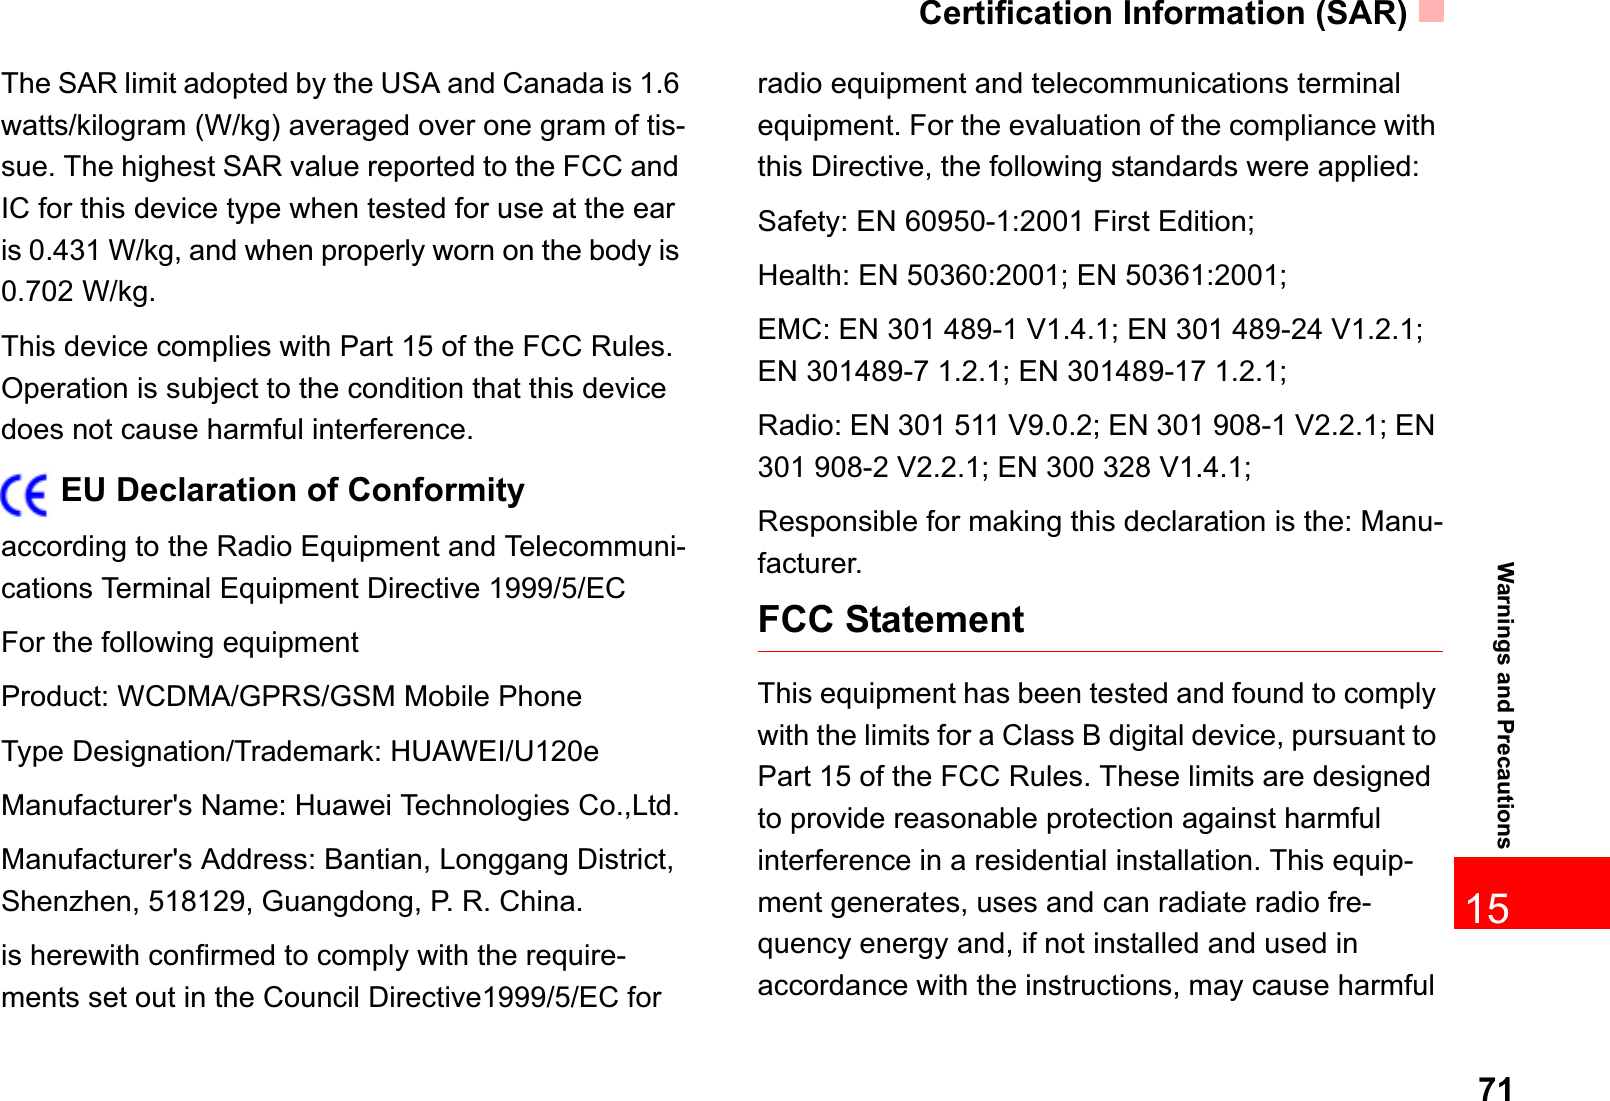 Certification Information (SAR)7115Warnings and PrecautionsThe SAR limit adopted by the USA and Canada is 1.6 watts/kilogram (W/kg) averaged over one gram of tis-sue. The highest SAR value reported to the FCC and IC for this device type when tested for use at the ear is 0.431 W/kg, and when properly worn on the body is 0.702 W/kg.This device complies with Part 15 of the FCC Rules. Operation is subject to the condition that this device does not cause harmful interference.EU Declaration of Conformityaccording to the Radio Equipment and Telecommuni-cations Terminal Equipment Directive 1999/5/ECFor the following equipment Product: WCDMA/GPRS/GSM Mobile PhoneType Designation/Trademark: HUAWEI/U120eManufacturer&apos;s Name: Huawei Technologies Co.,Ltd.Manufacturer&apos;s Address: Bantian, Longgang District, Shenzhen, 518129, Guangdong, P. R. China.is herewith confirmed to comply with the require-ments set out in the Council Directive1999/5/EC for radio equipment and telecommunications terminal equipment. For the evaluation of the compliance with this Directive, the following standards were applied:Safety: EN 60950-1:2001 First Edition;Health: EN 50360:2001; EN 50361:2001;EMC: EN 301 489-1 V1.4.1; EN 301 489-24 V1.2.1; EN 301489-7 1.2.1; EN 301489-17 1.2.1;Radio: EN 301 511 V9.0.2; EN 301 908-1 V2.2.1; EN 301 908-2 V2.2.1; EN 300 328 V1.4.1;Responsible for making this declaration is the: Manu-facturer.FCC StatementThis equipment has been tested and found to comply with the limits for a Class B digital device, pursuant to Part 15 of the FCC Rules. These limits are designed to provide reasonable protection against harmful interference in a residential installation. This equip-ment generates, uses and can radiate radio fre-quency energy and, if not installed and used in accordance with the instructions, may cause harmful 